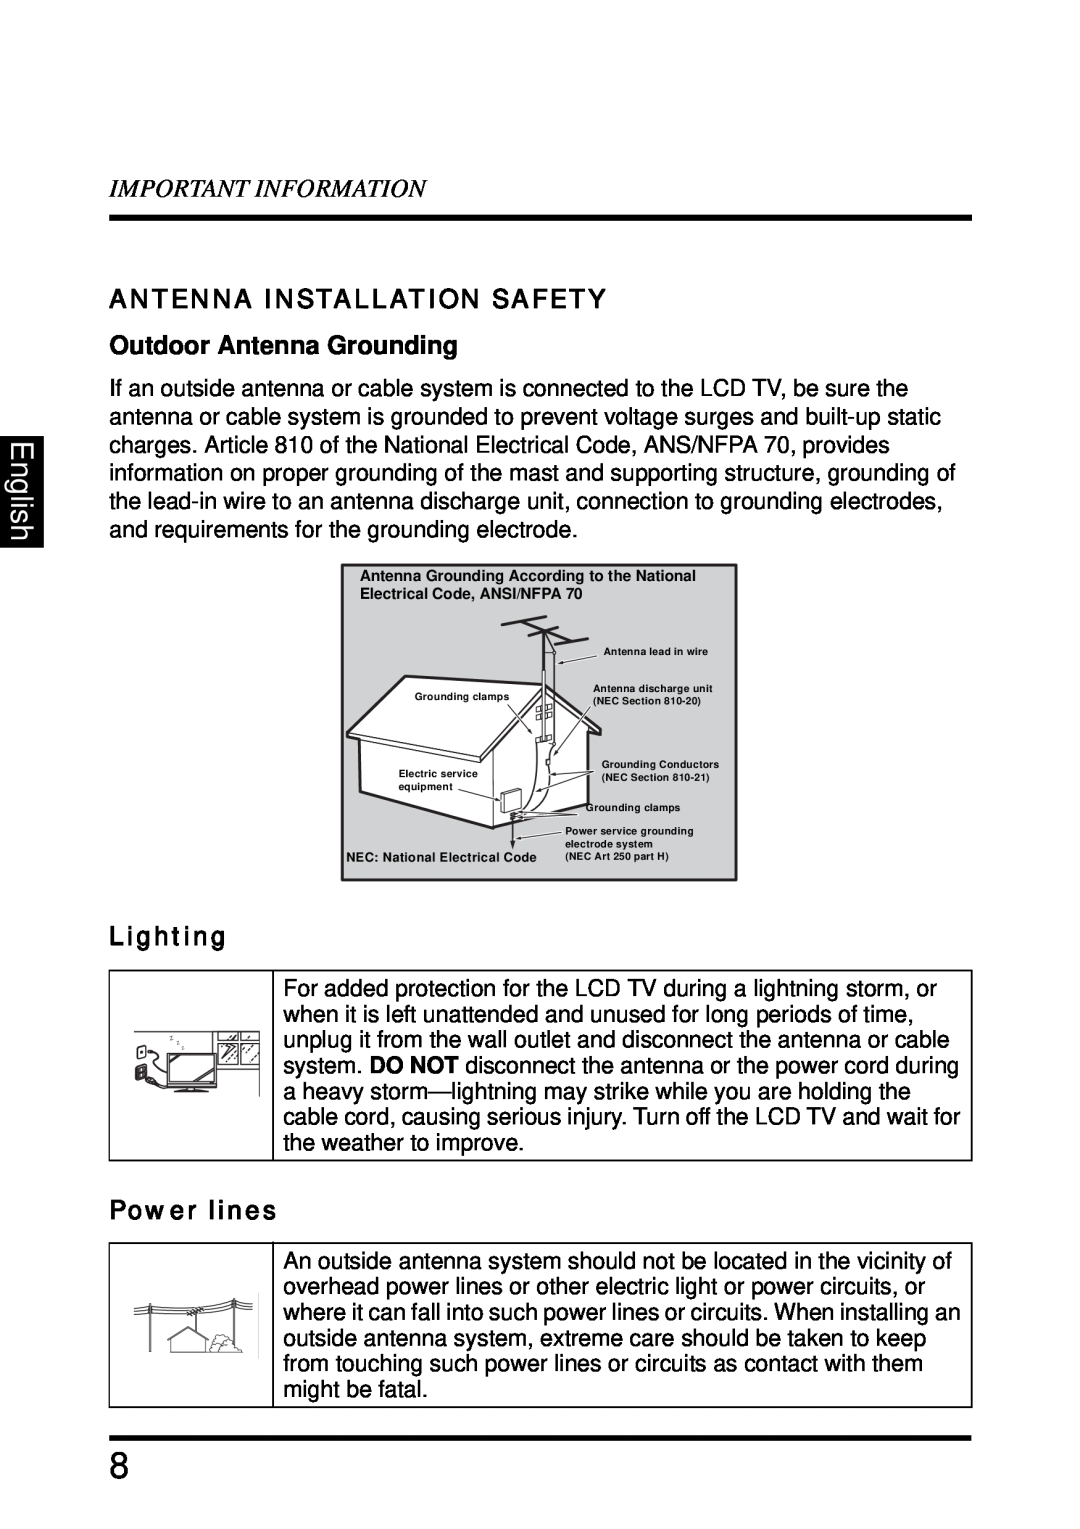 Westinghouse SK-32H640G English, Important Information, ANTENNA INSTALLATION SAFETY Outdoor Antenna Grounding, Lighting 